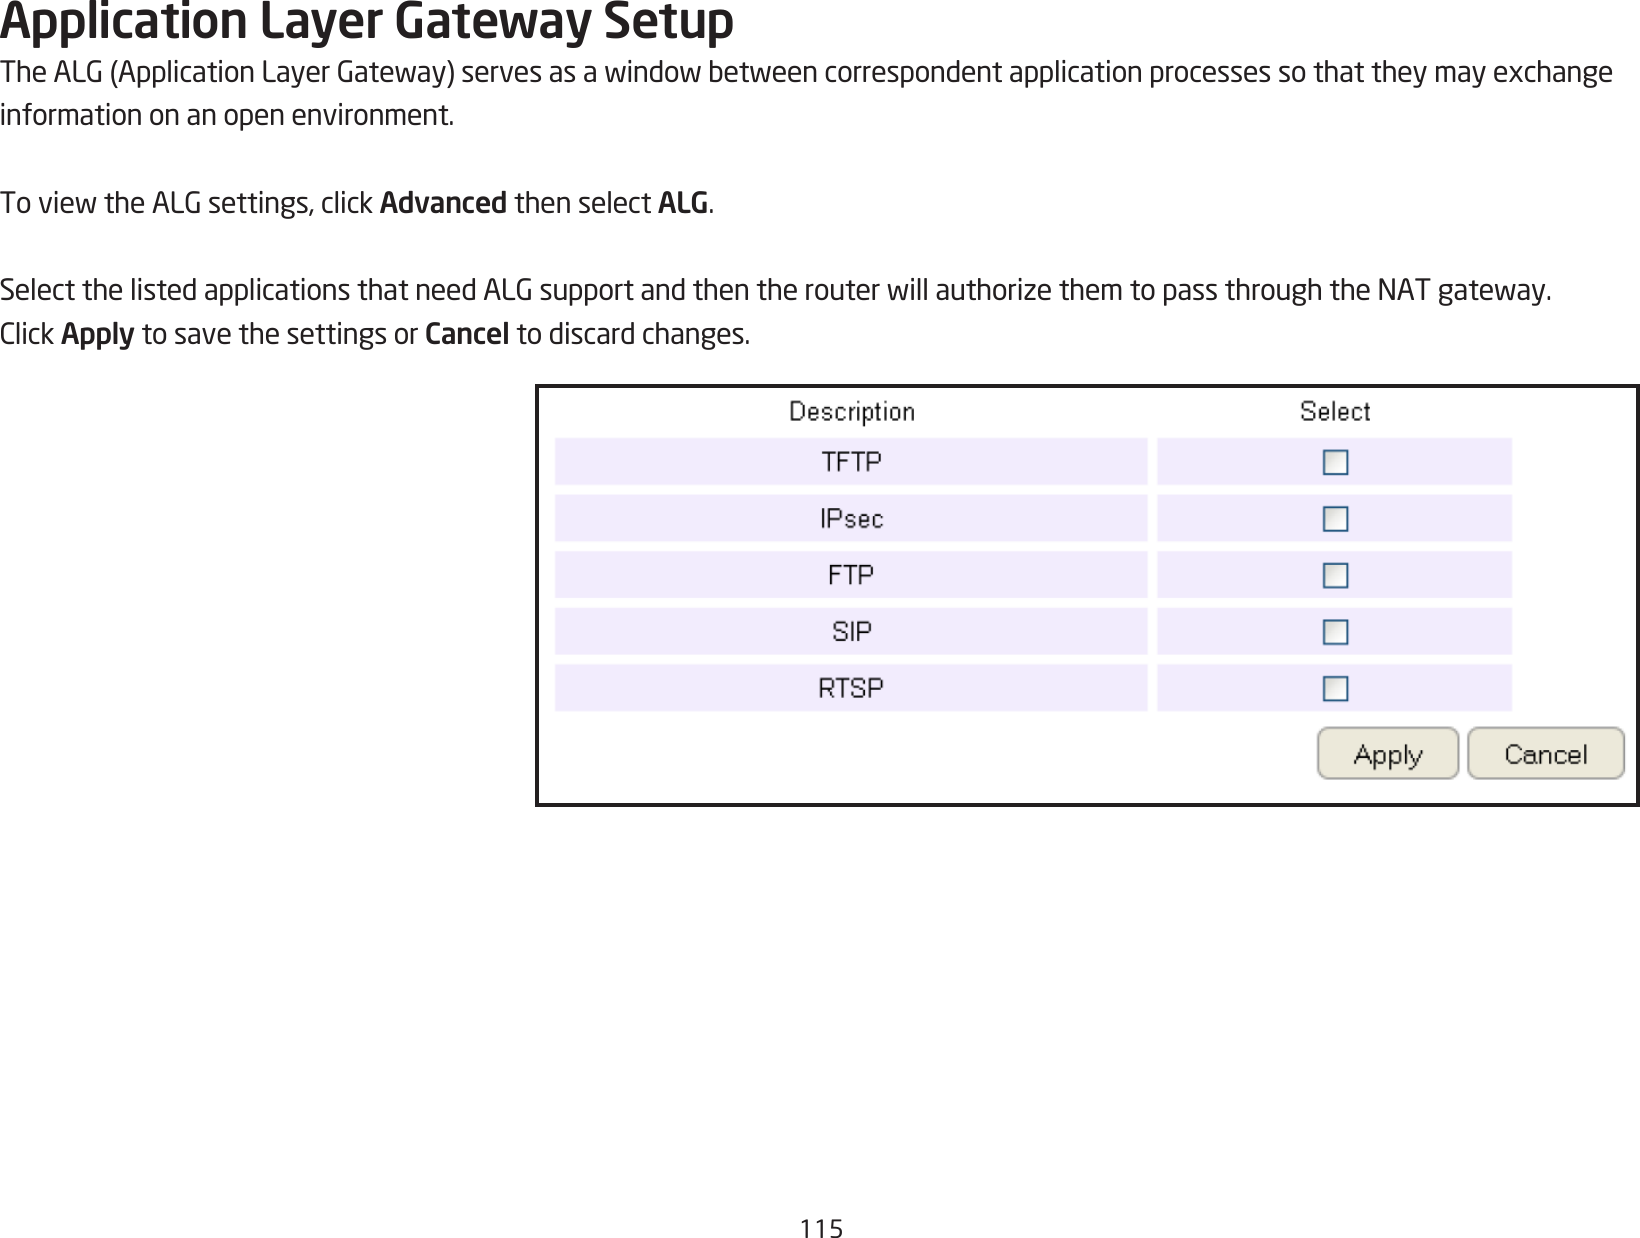 115Application Layer Gateway SetupTheALG(ApplicationLayerGateway)servesasawindowbetweencorrespondentapplicationprocessessothattheymayexchangeinformation on an open environment.ToviewtheALGsettings,clickAdvanced then select ALG.SelectthelistedapplicationsthatneedALGsupportandthentherouterwillauthorizethemtopassthroughtheNATgateway.ClickApply to save the settings or Cancel to discard changes.